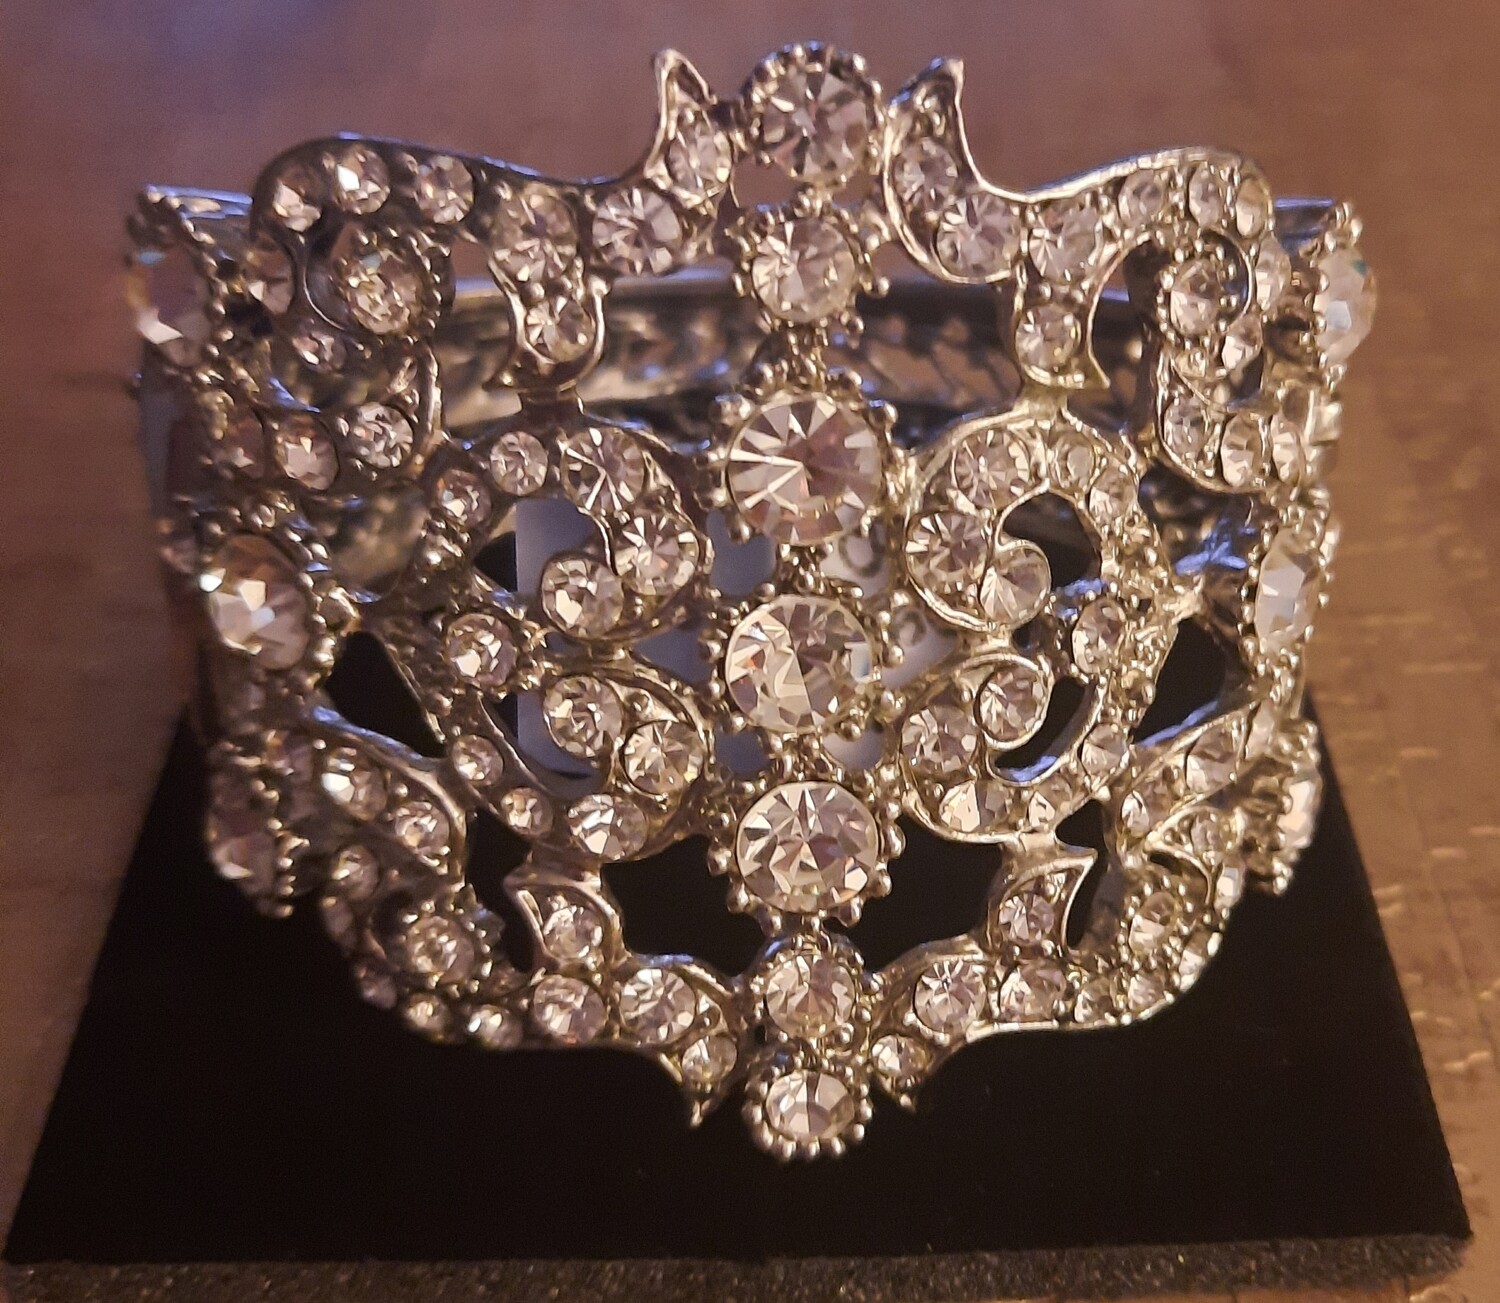 Bridal cuff bracelet lined with rhinestone and cubic zirconia c. 1950's